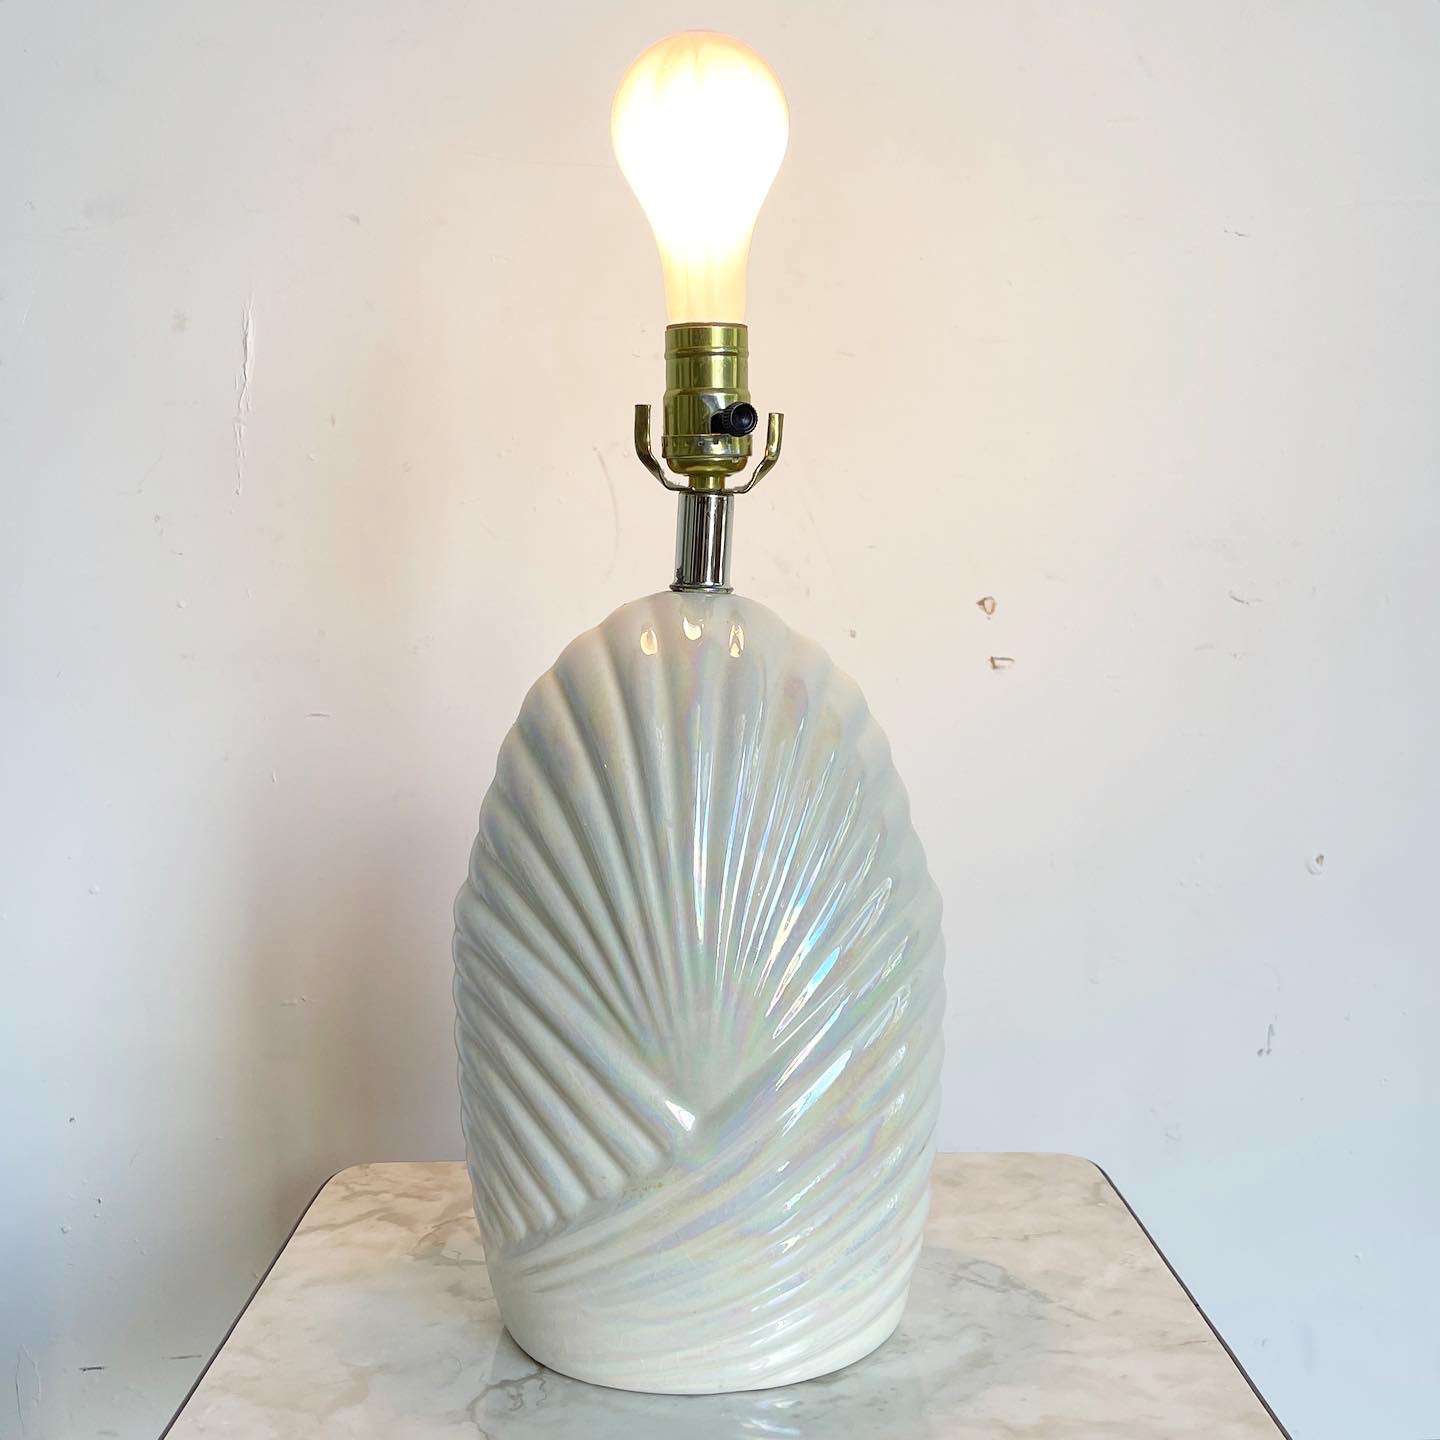 1980s Art Deco Revival Paolo Gucci Table Lamp